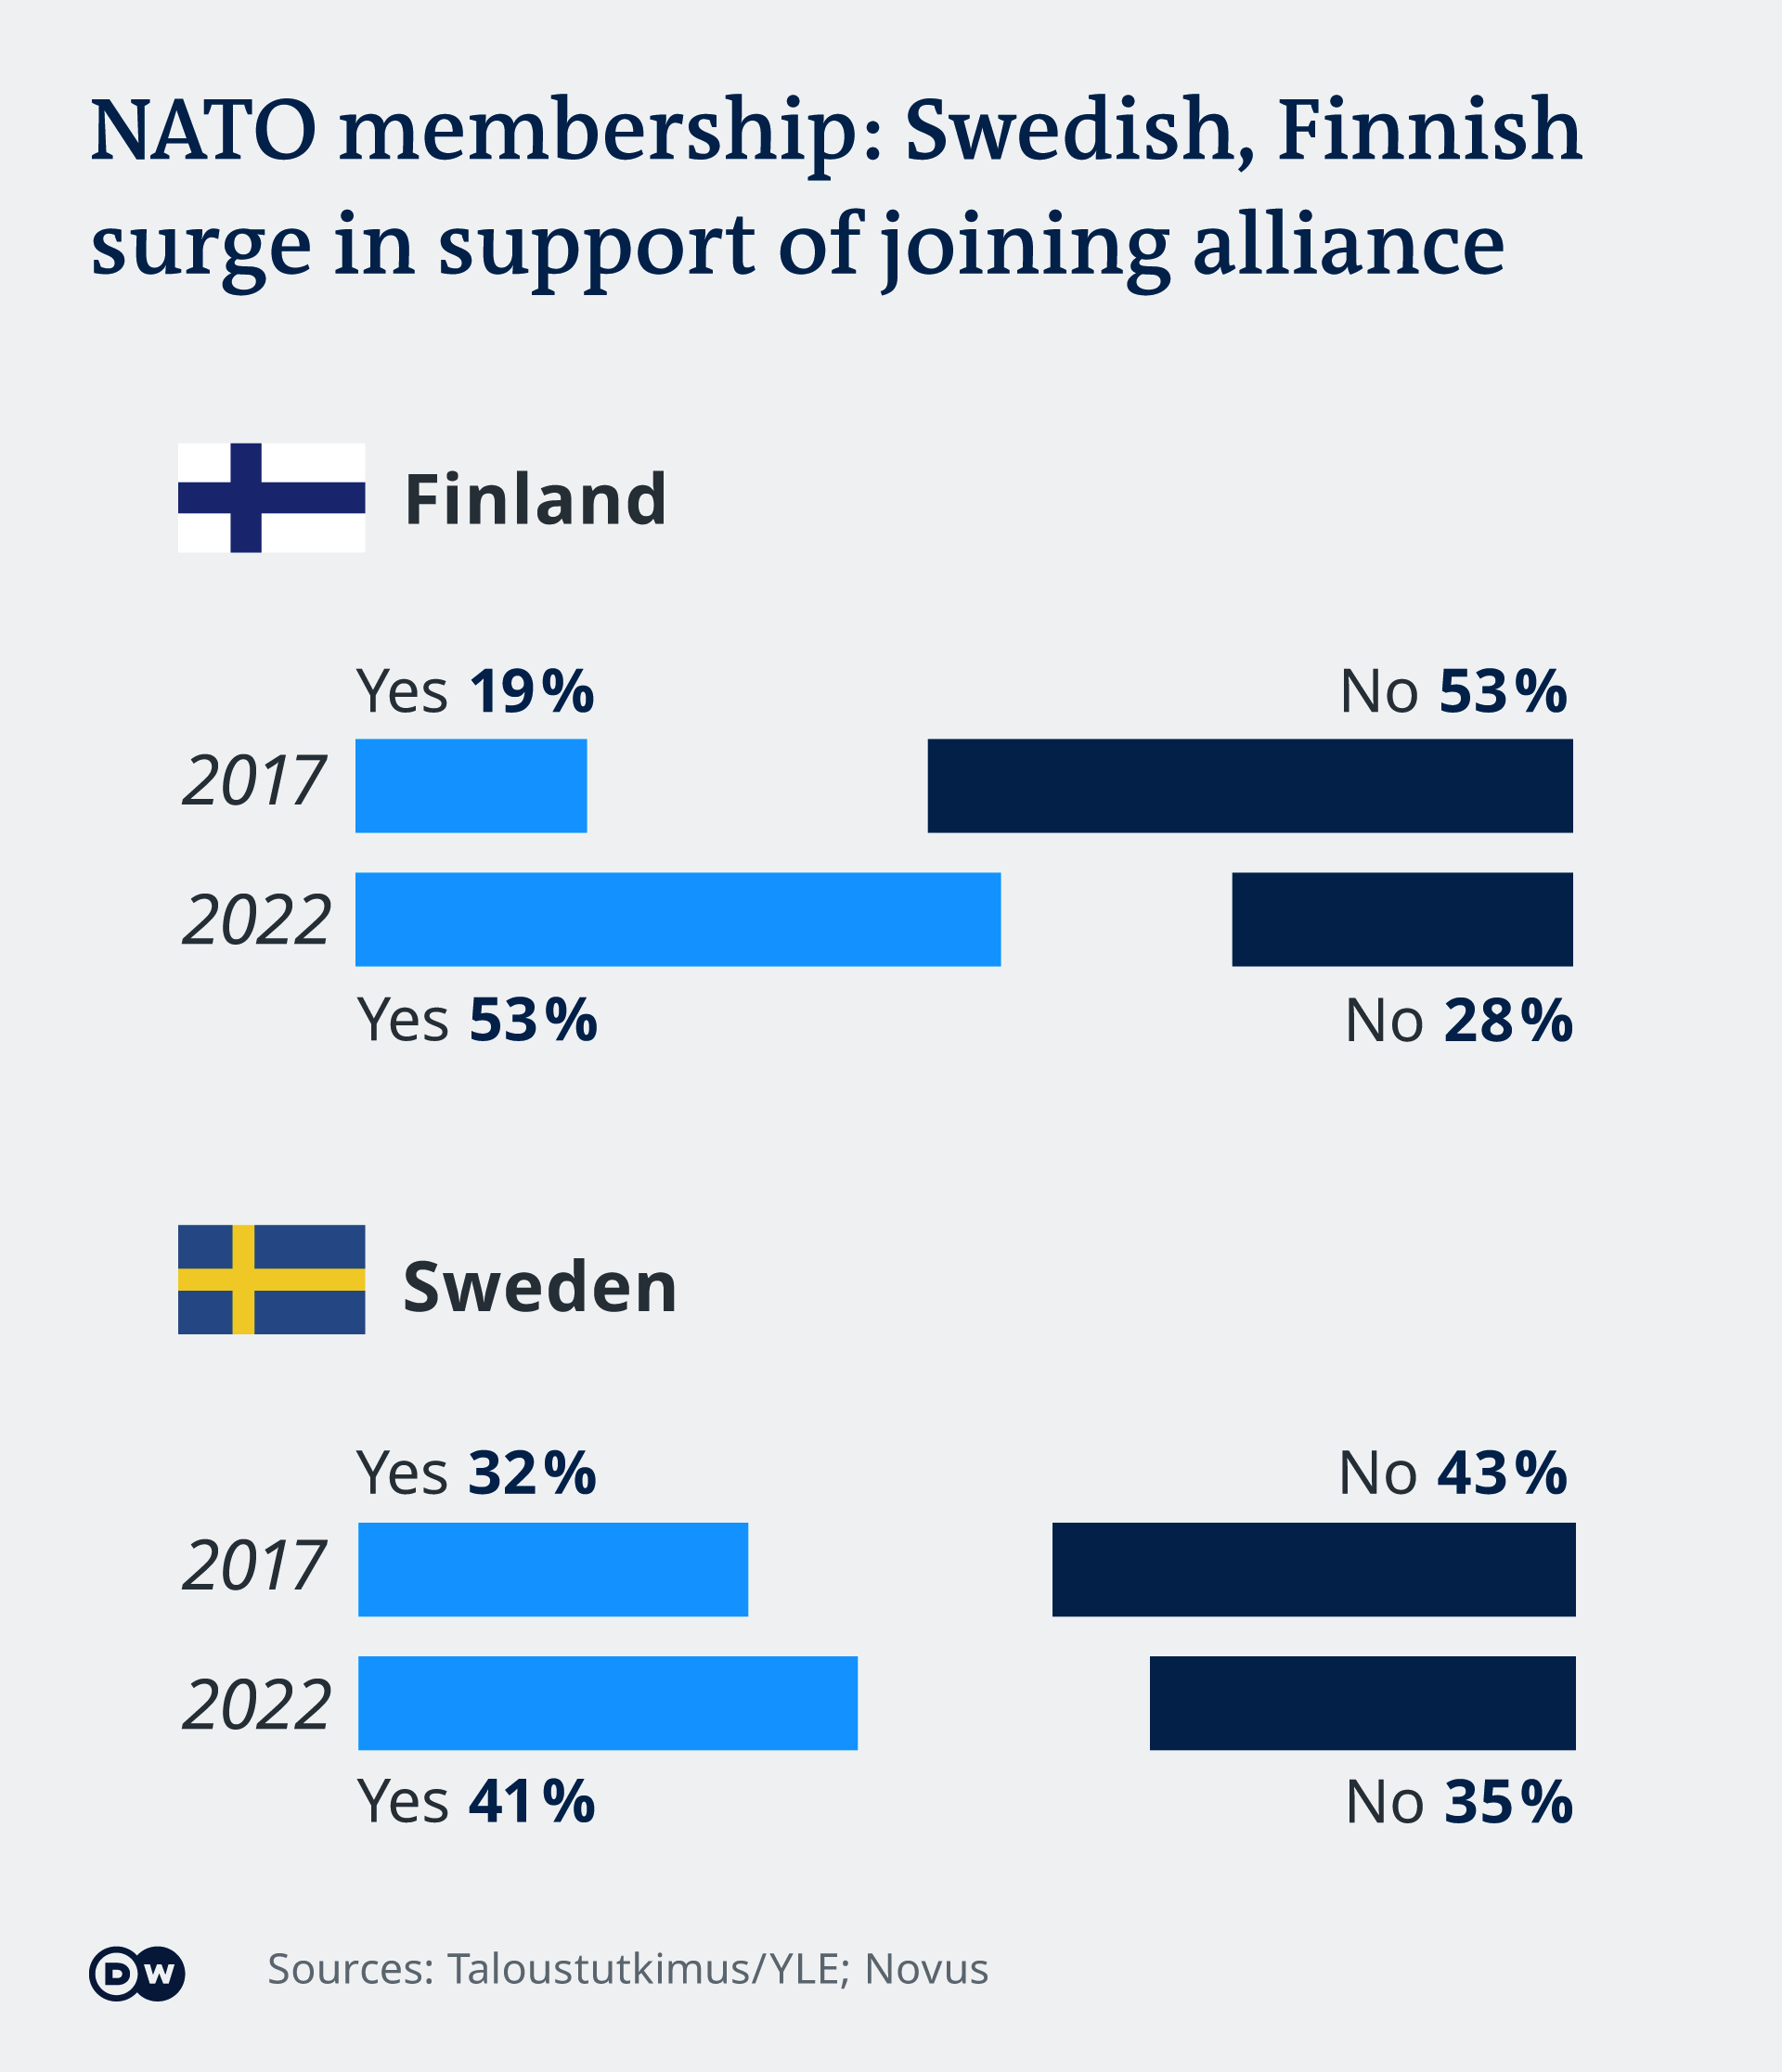 Source: https://www.dw.com/en/war-in-ukraine-will-it-bring-sweden-and-finland-closer-to-joining-nato/a-61003152